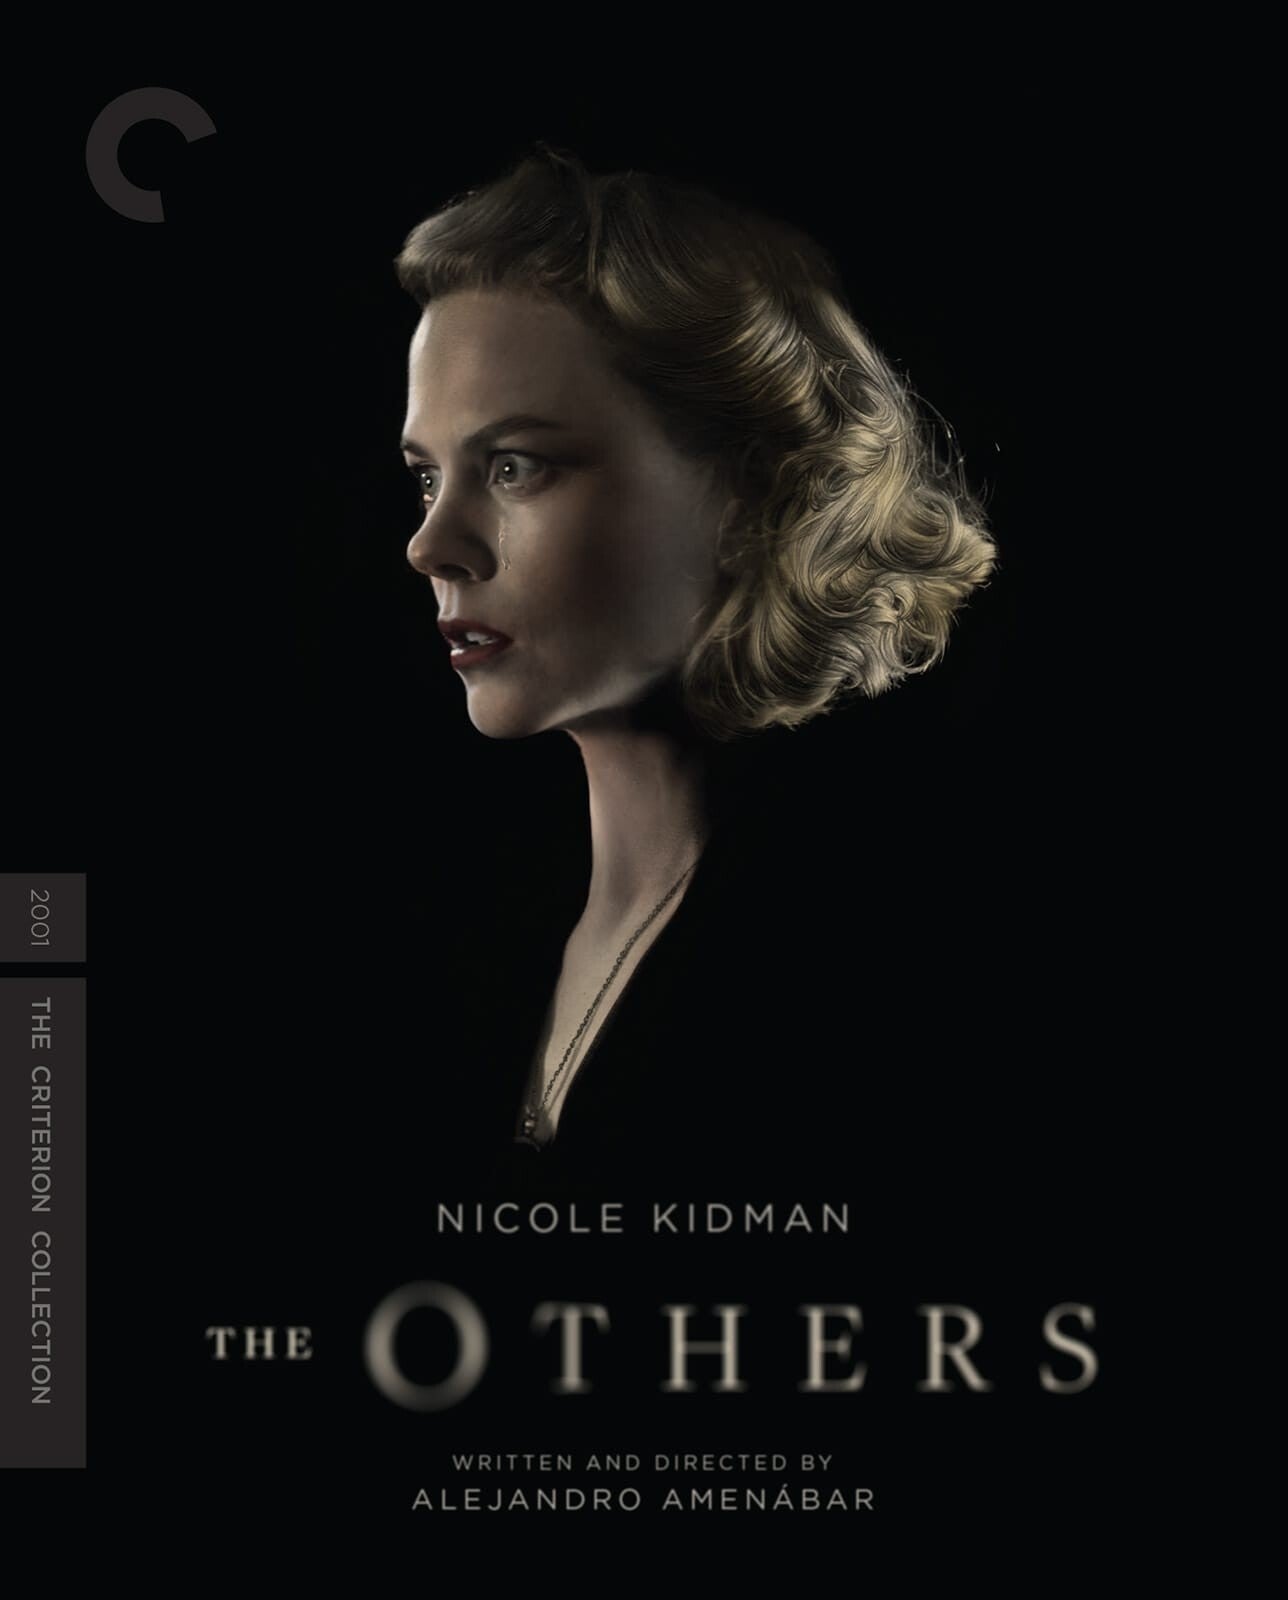 The Others 4K: Criterion Collection (2001)